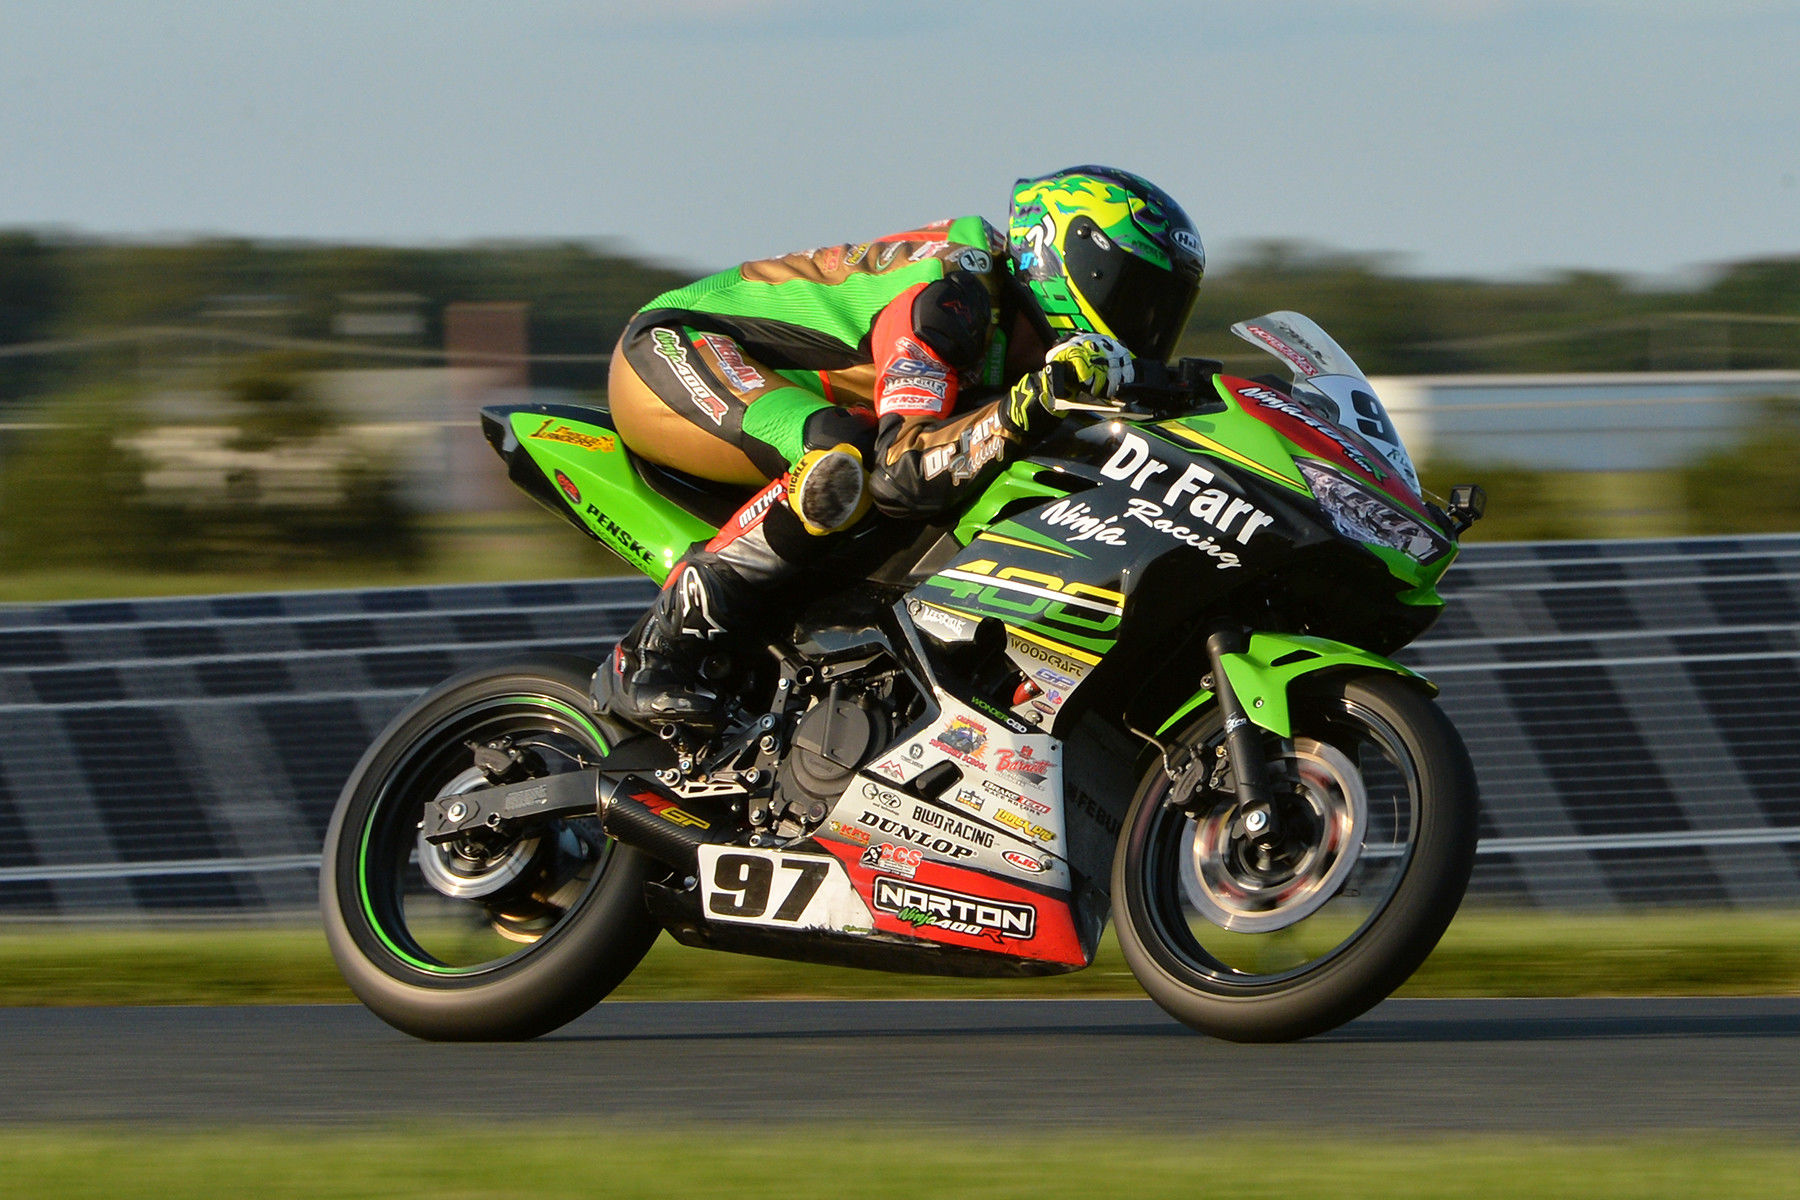 Rocco Landers (97) in action at New Jersey Motorsports Park. Photo by Lisa Theobald, courtesy ASRA/CCS.